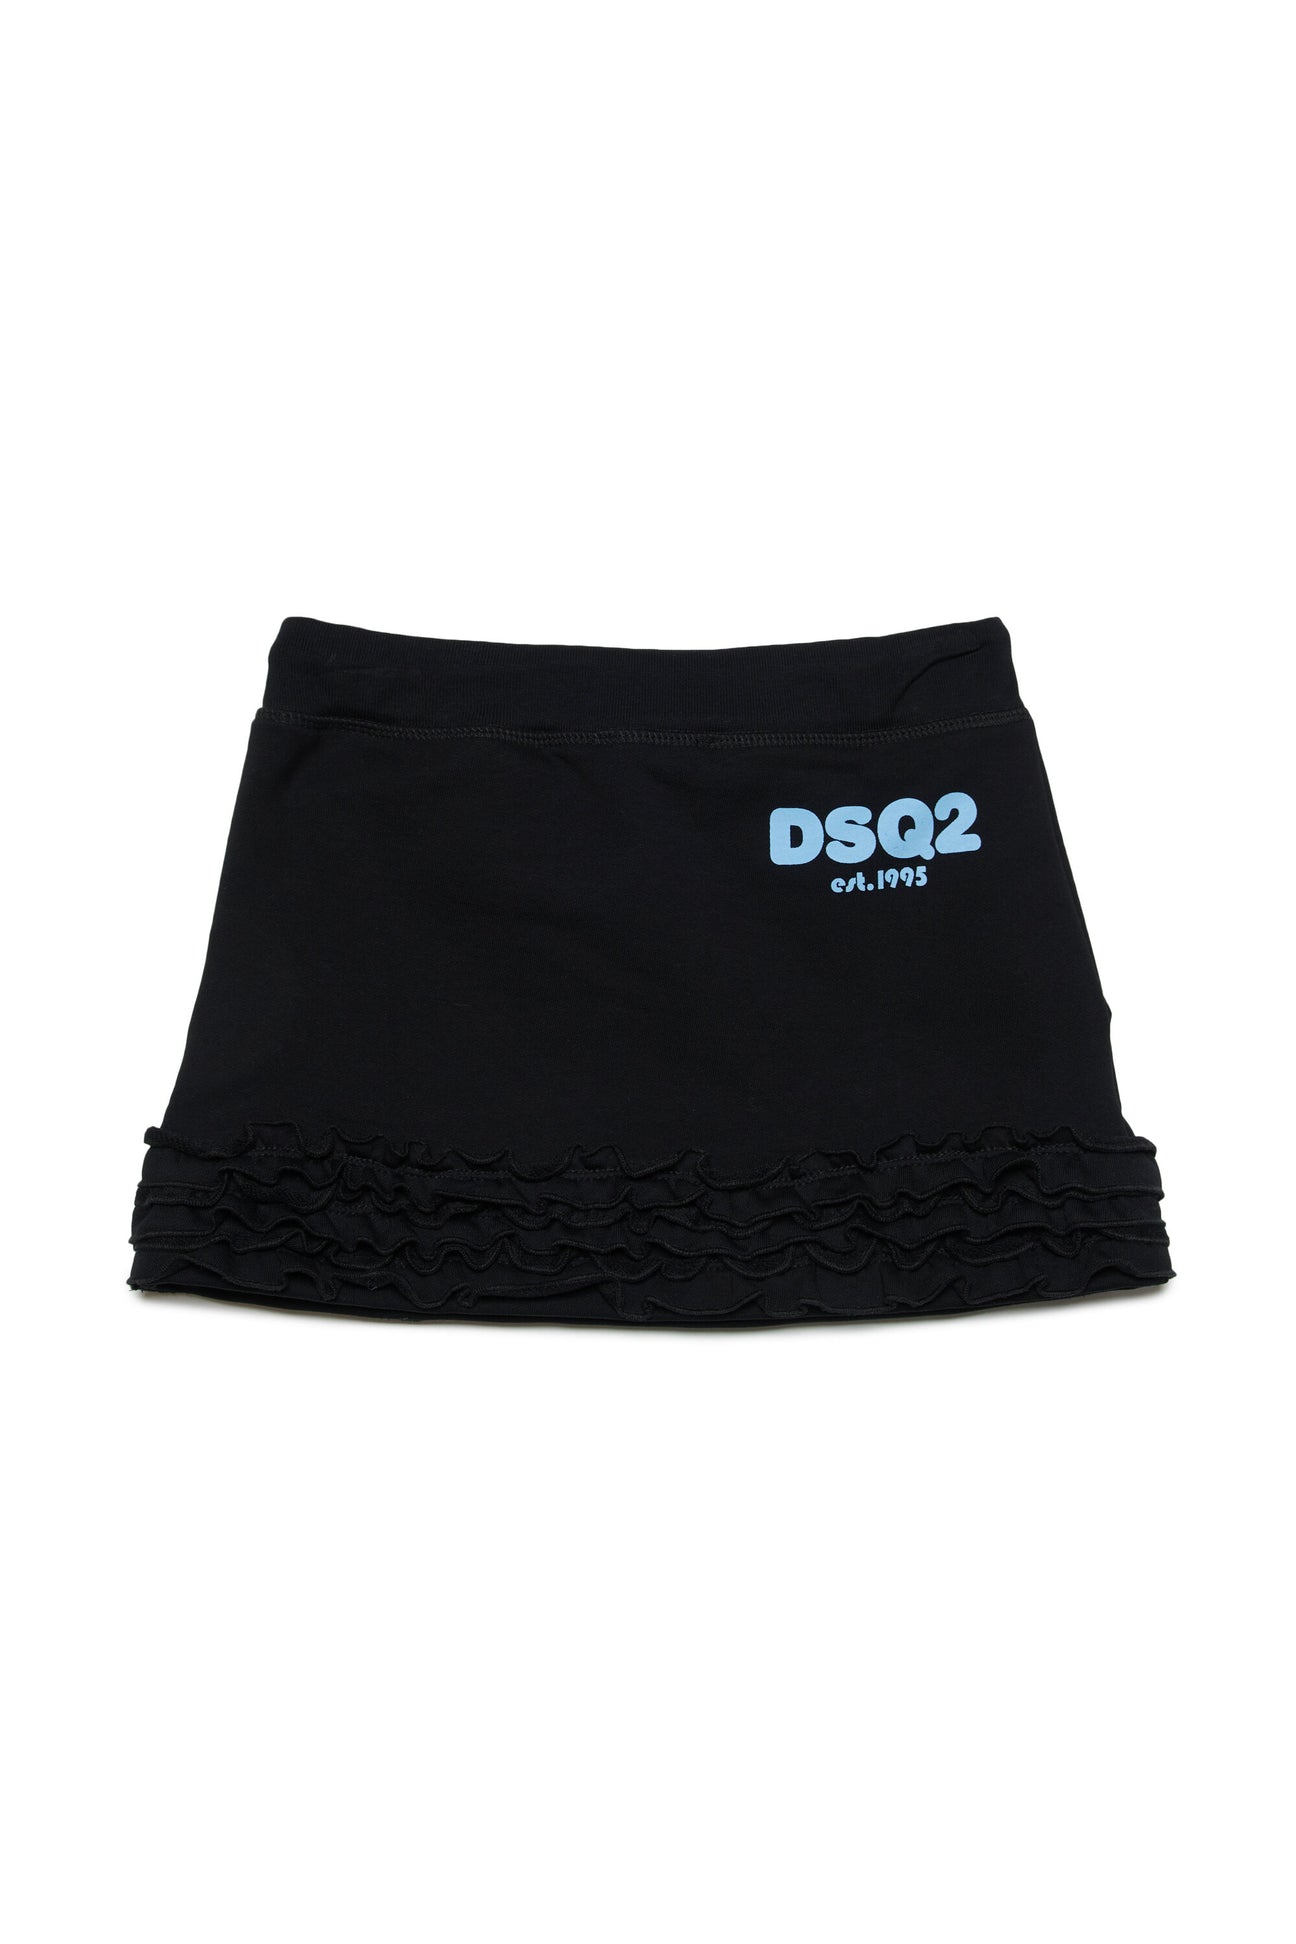 Skirt with logo DSQ2 est.1995 and ruffles Skirt with logo DSQ2 est.1995 and ruffles